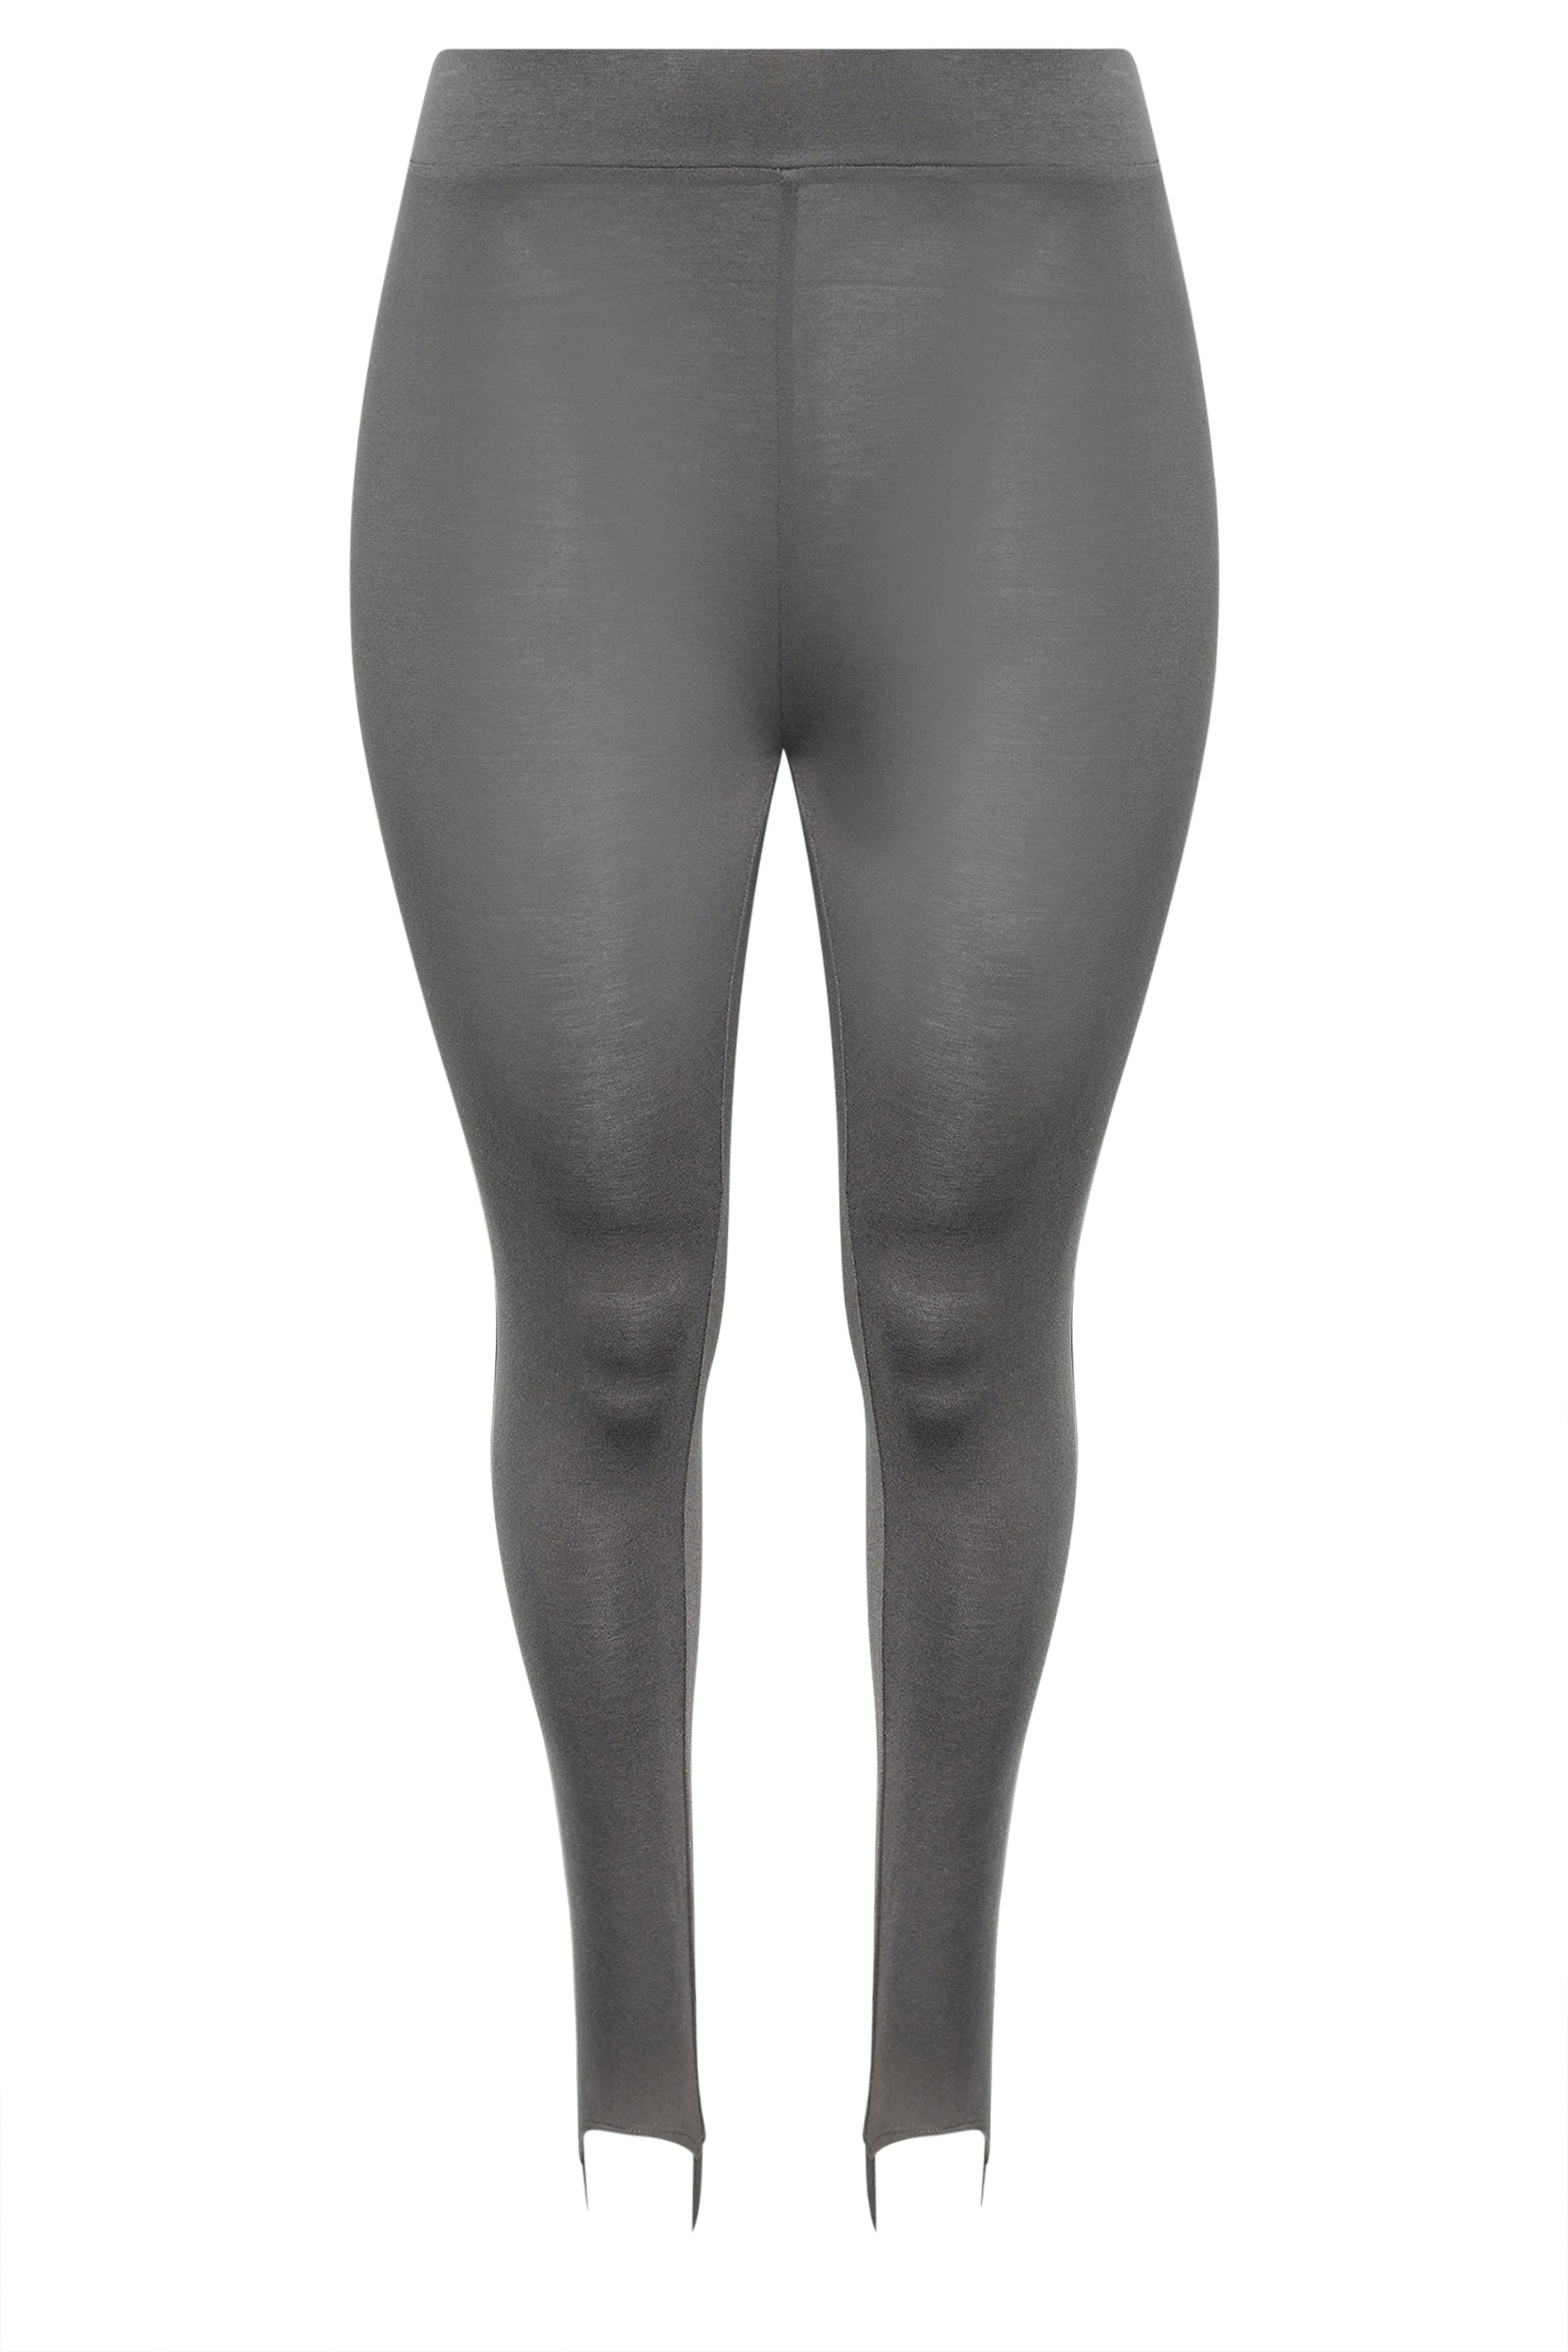 Free people (like lululemon ) yoga aerial leggings stirrup in Xs - S gray  high waisted, Women's Fashion, Activewear on Carousell